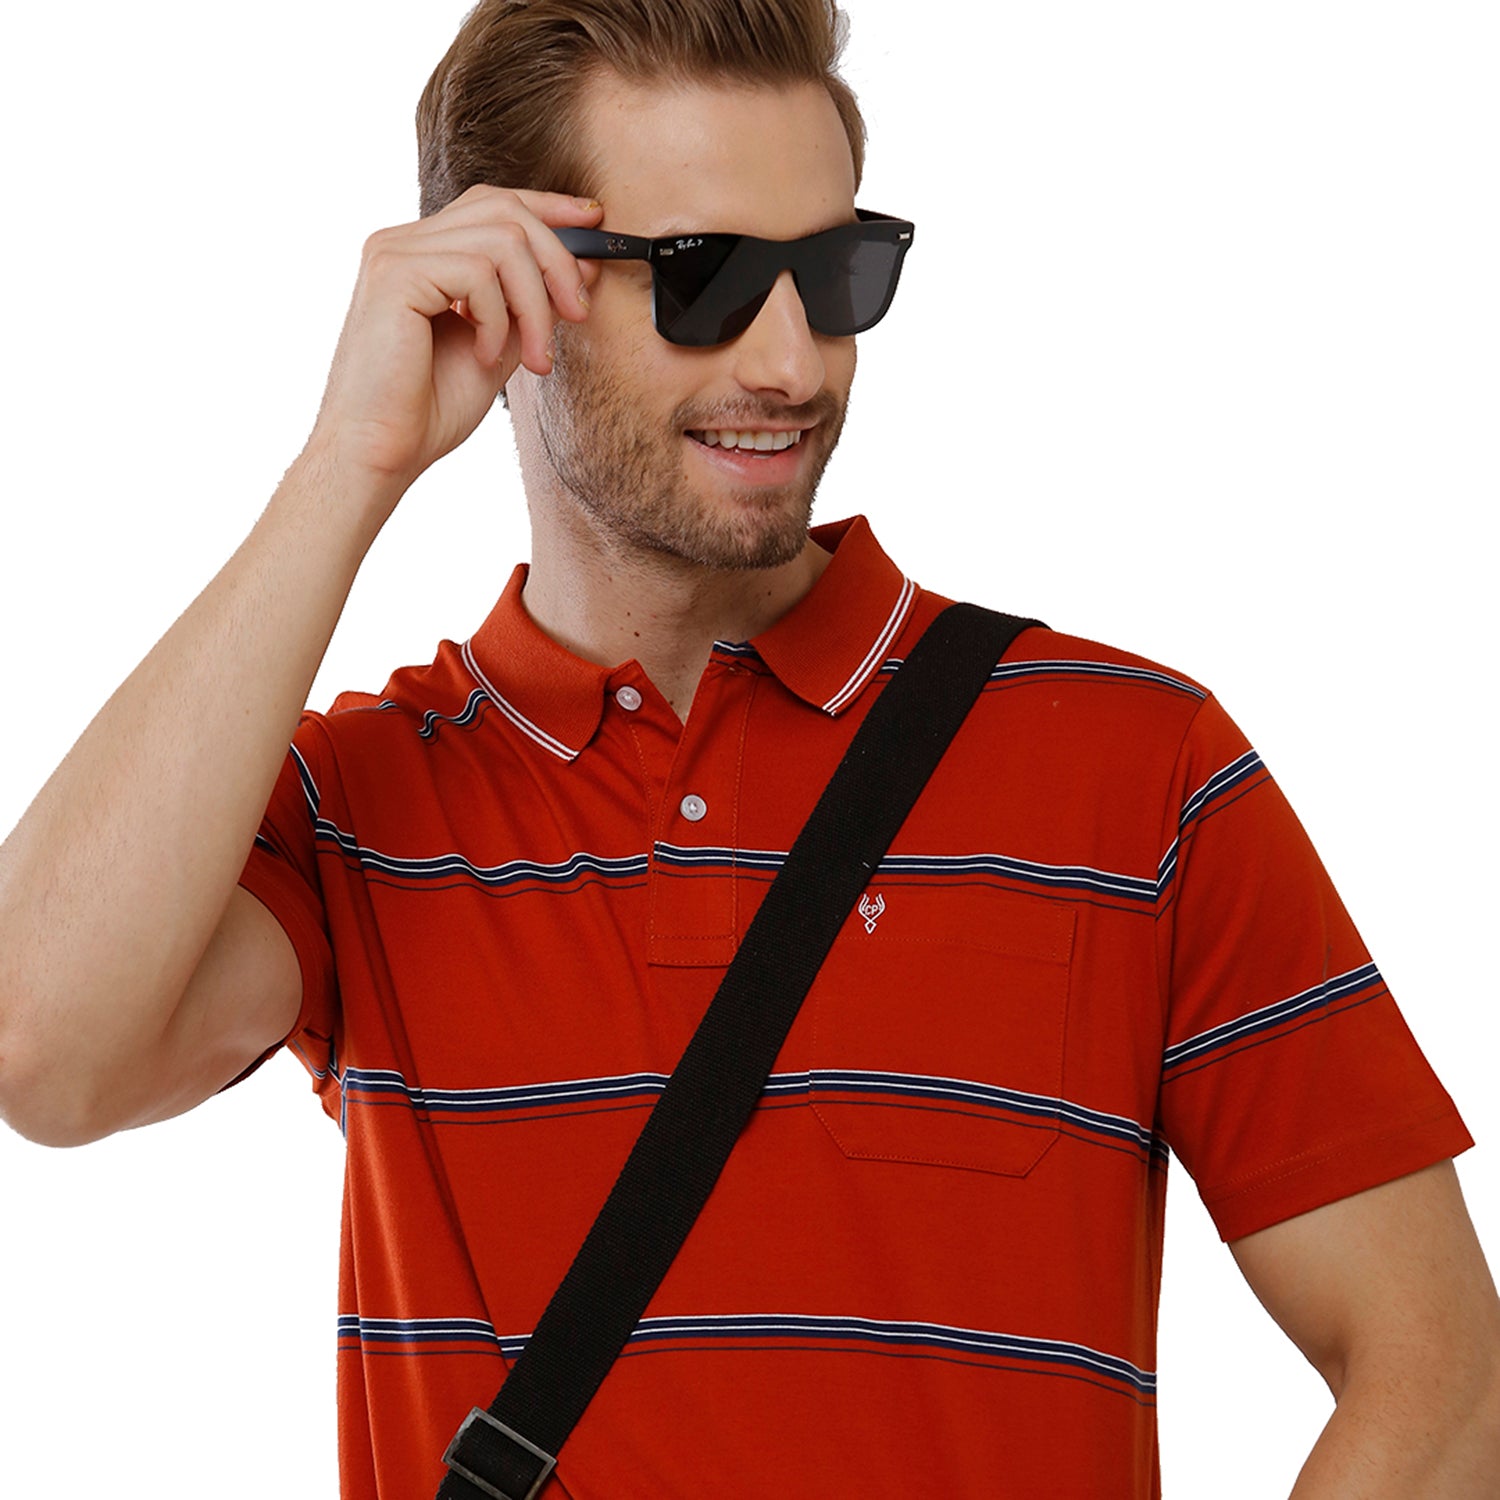 Classic Polo Mens 100% Cotton Stripped Authentic Fit Red Color Polo Neck T-Shirt -AP 64 A T-shirt Classic Polo 